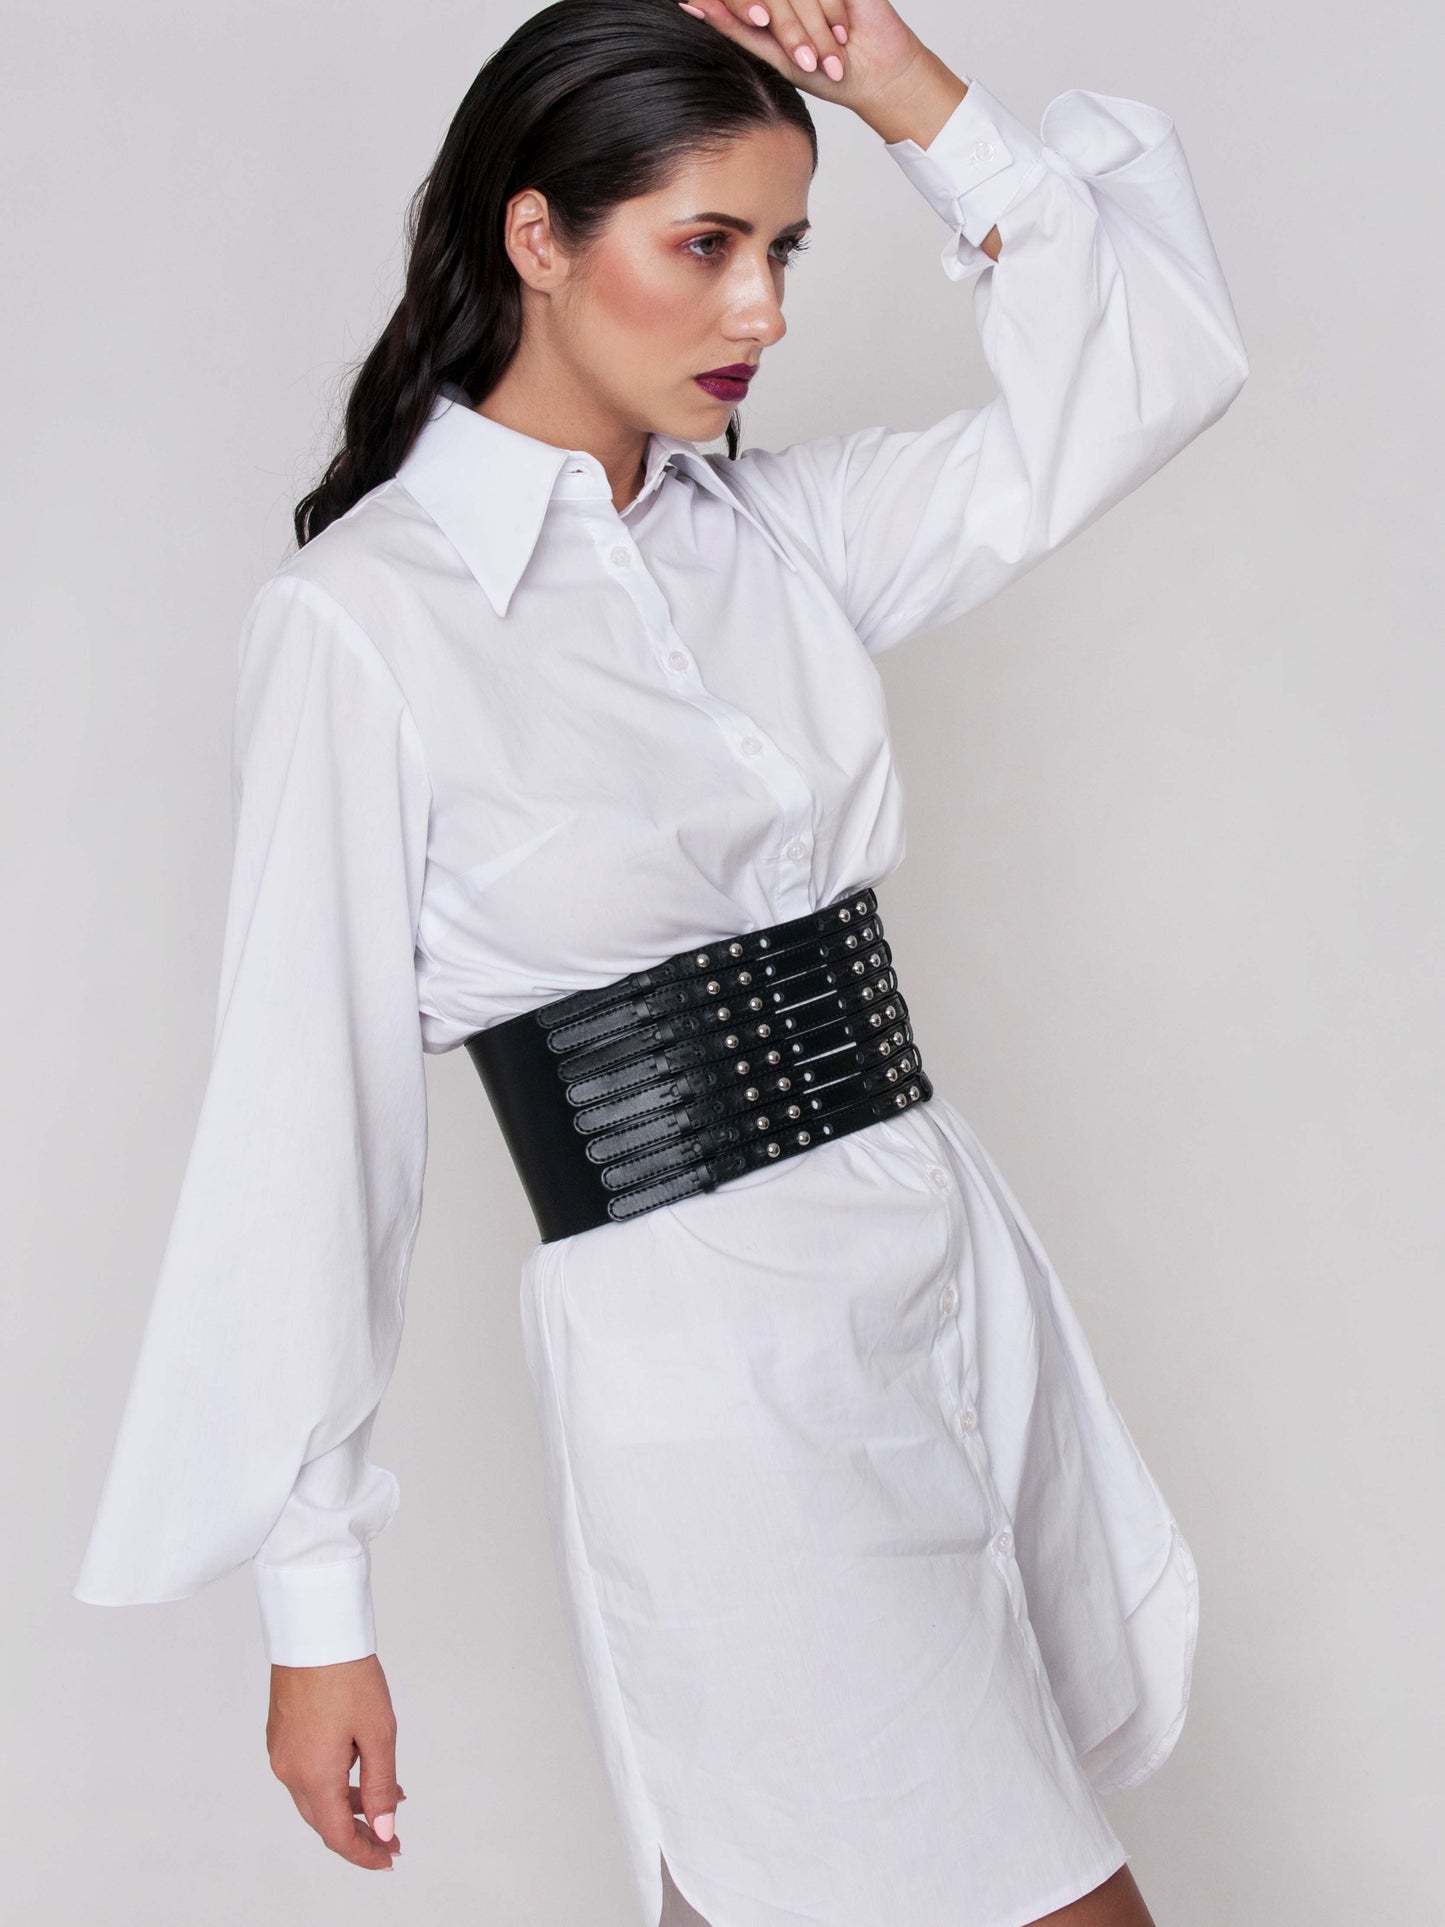 Side view of black leather corset belt worn by a woman over a white shirt dress.